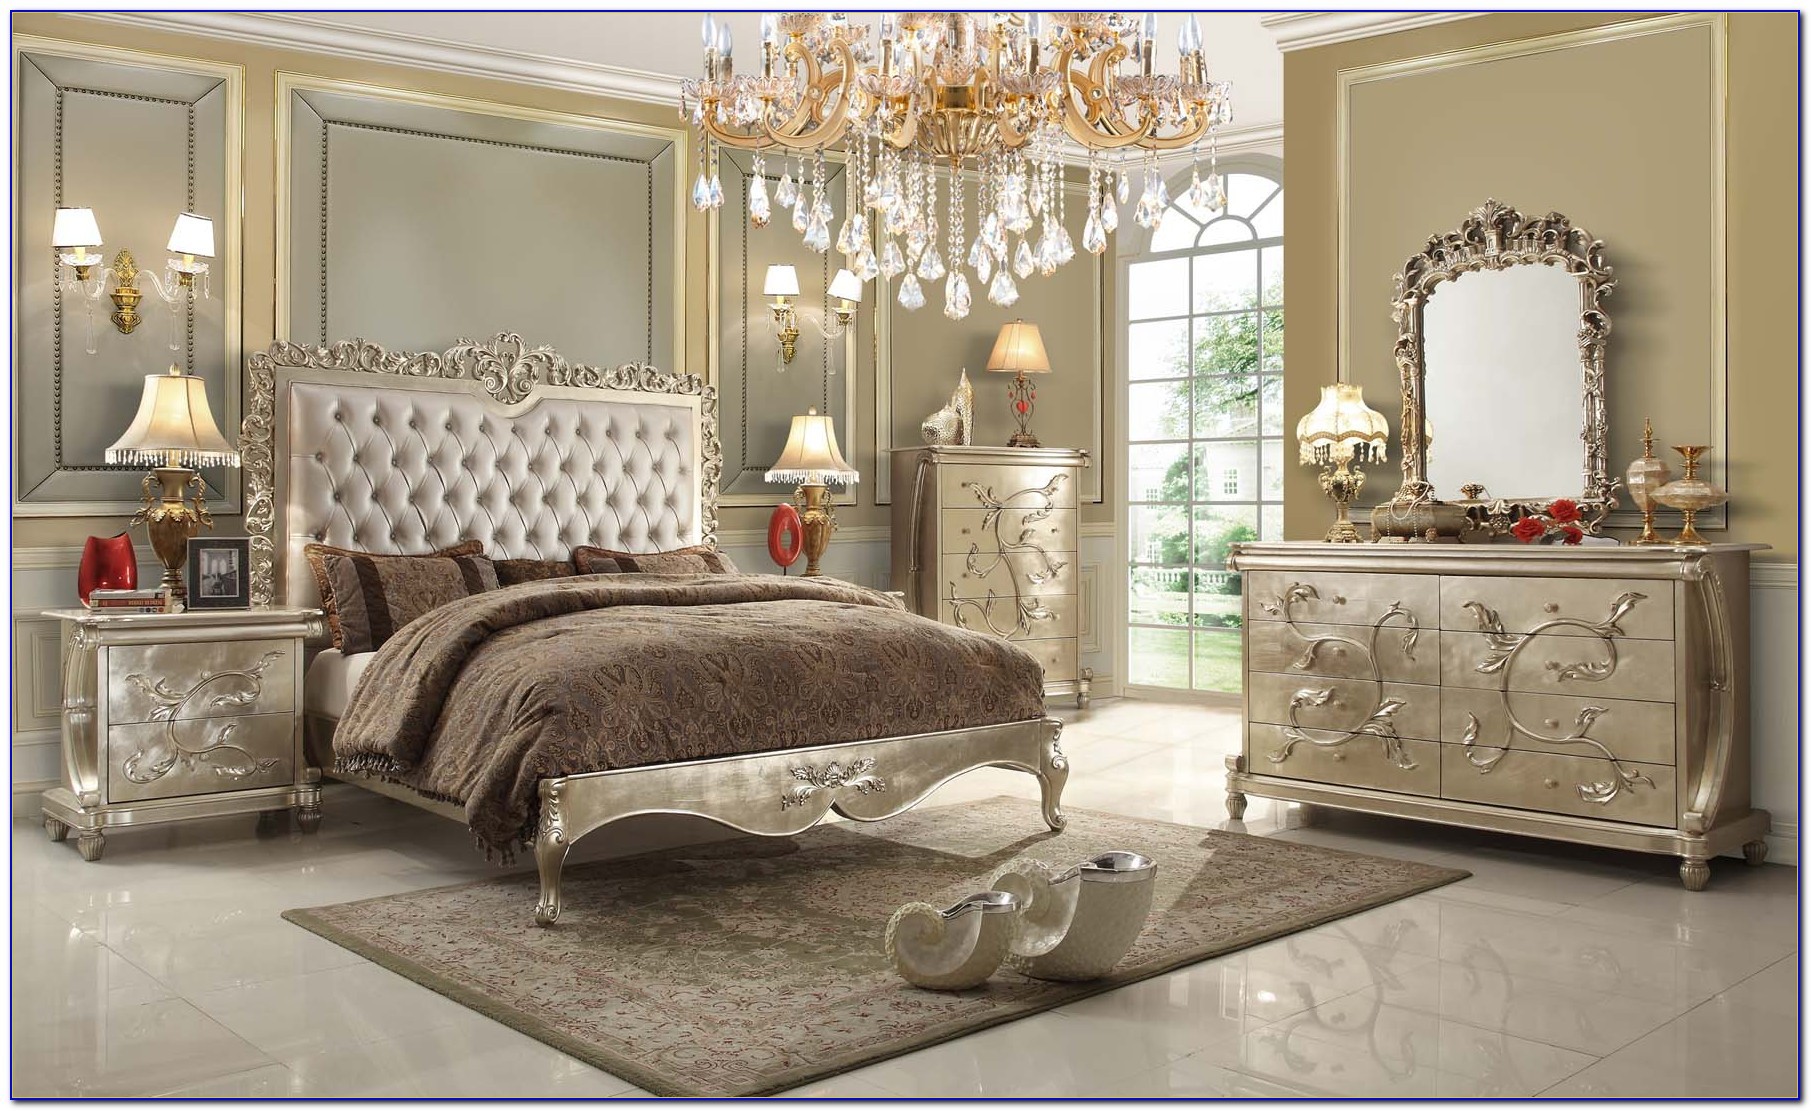 Incredible Victorian Style Bedroom Furniture Ireland - Victorian Style Architecture Bedroom - HD Wallpaper 